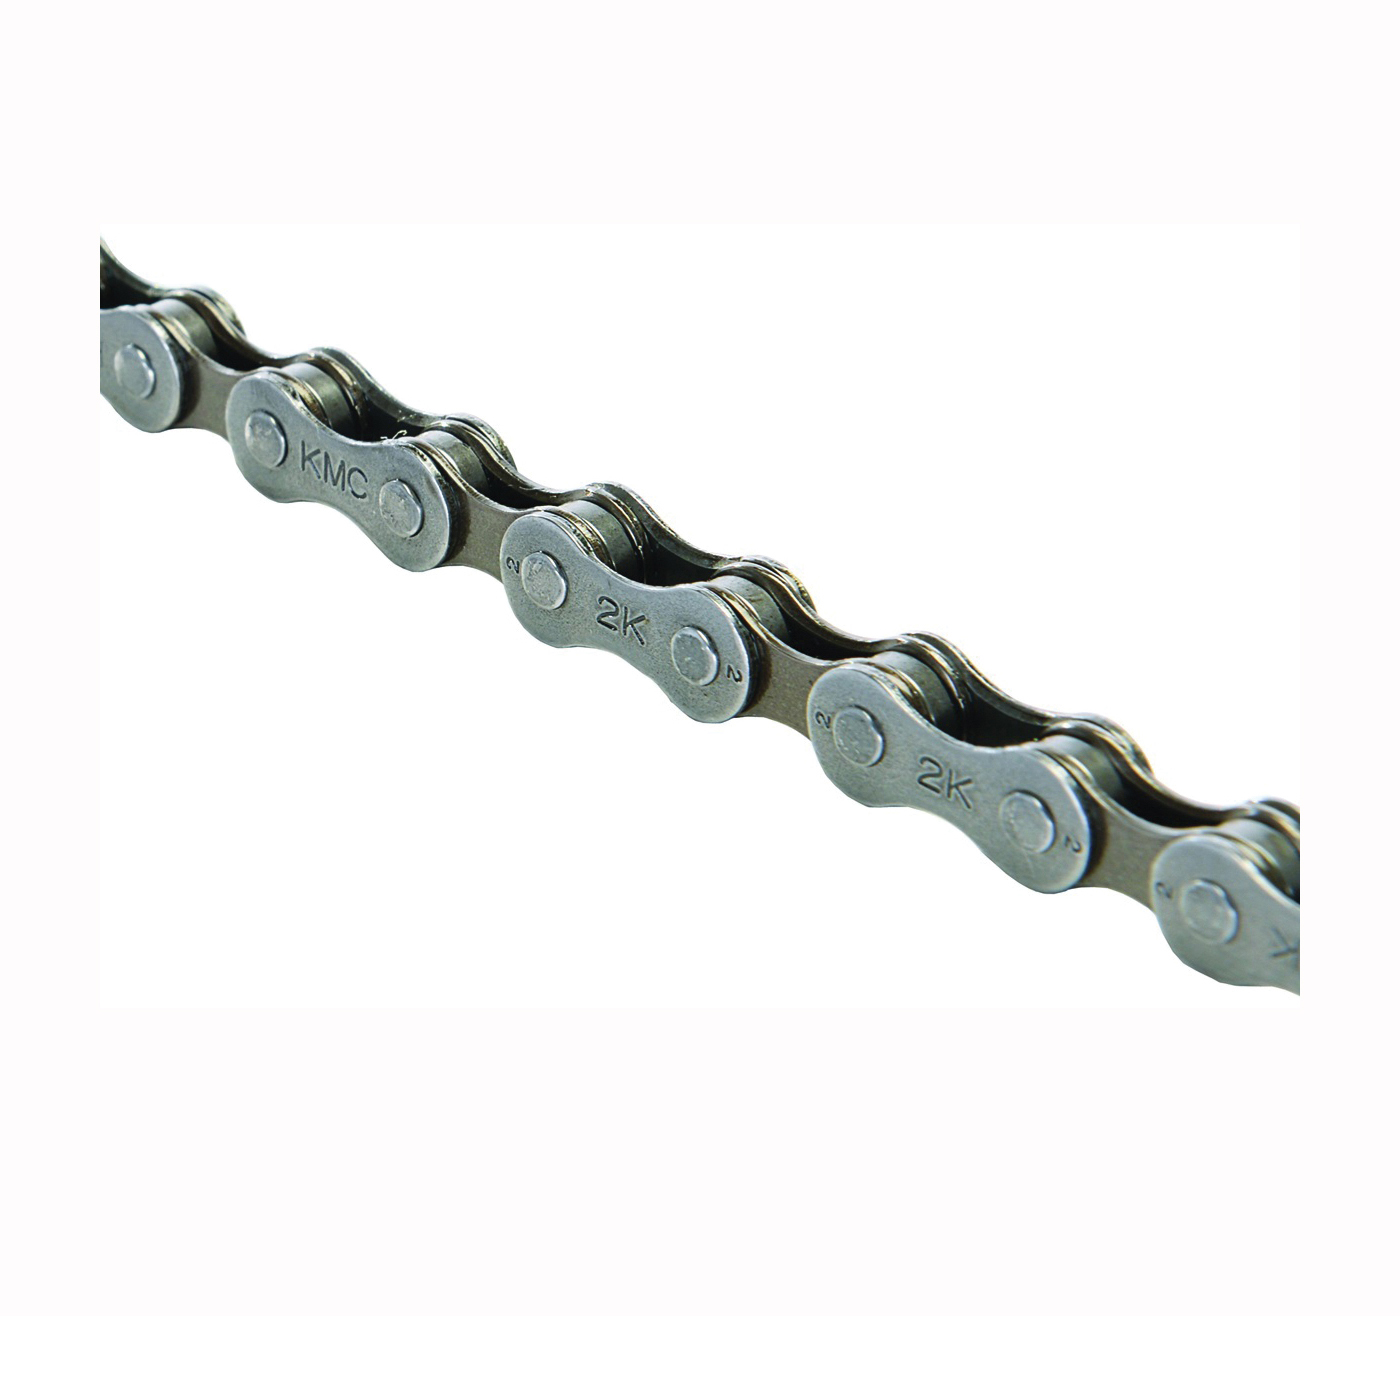 67415 Bicycle Chain, Multi-Speed